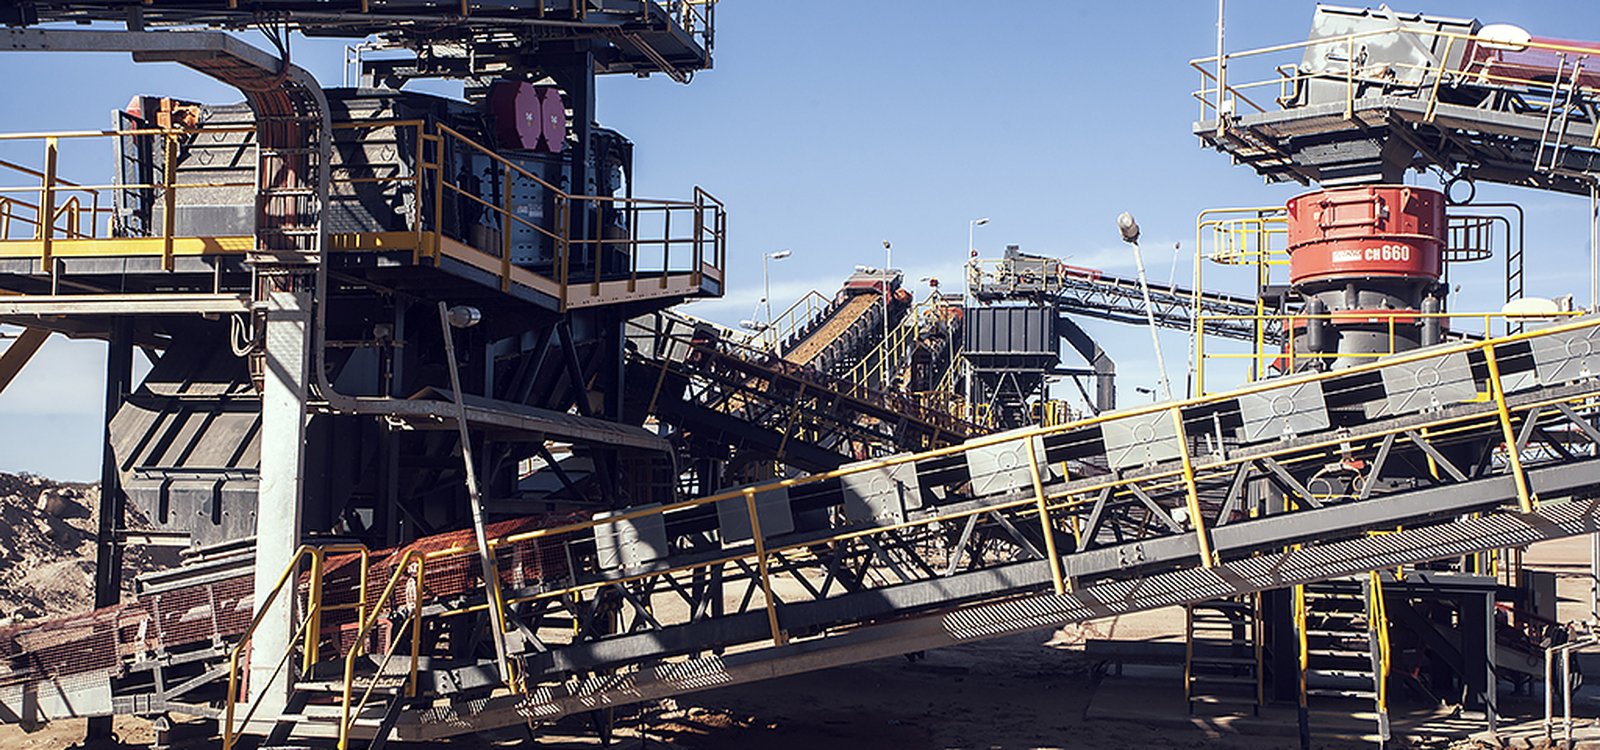 The Sandvik crushing and screening circuit at the Regis Rosemont mine in Western Australia was up and running at full capacity after a week.